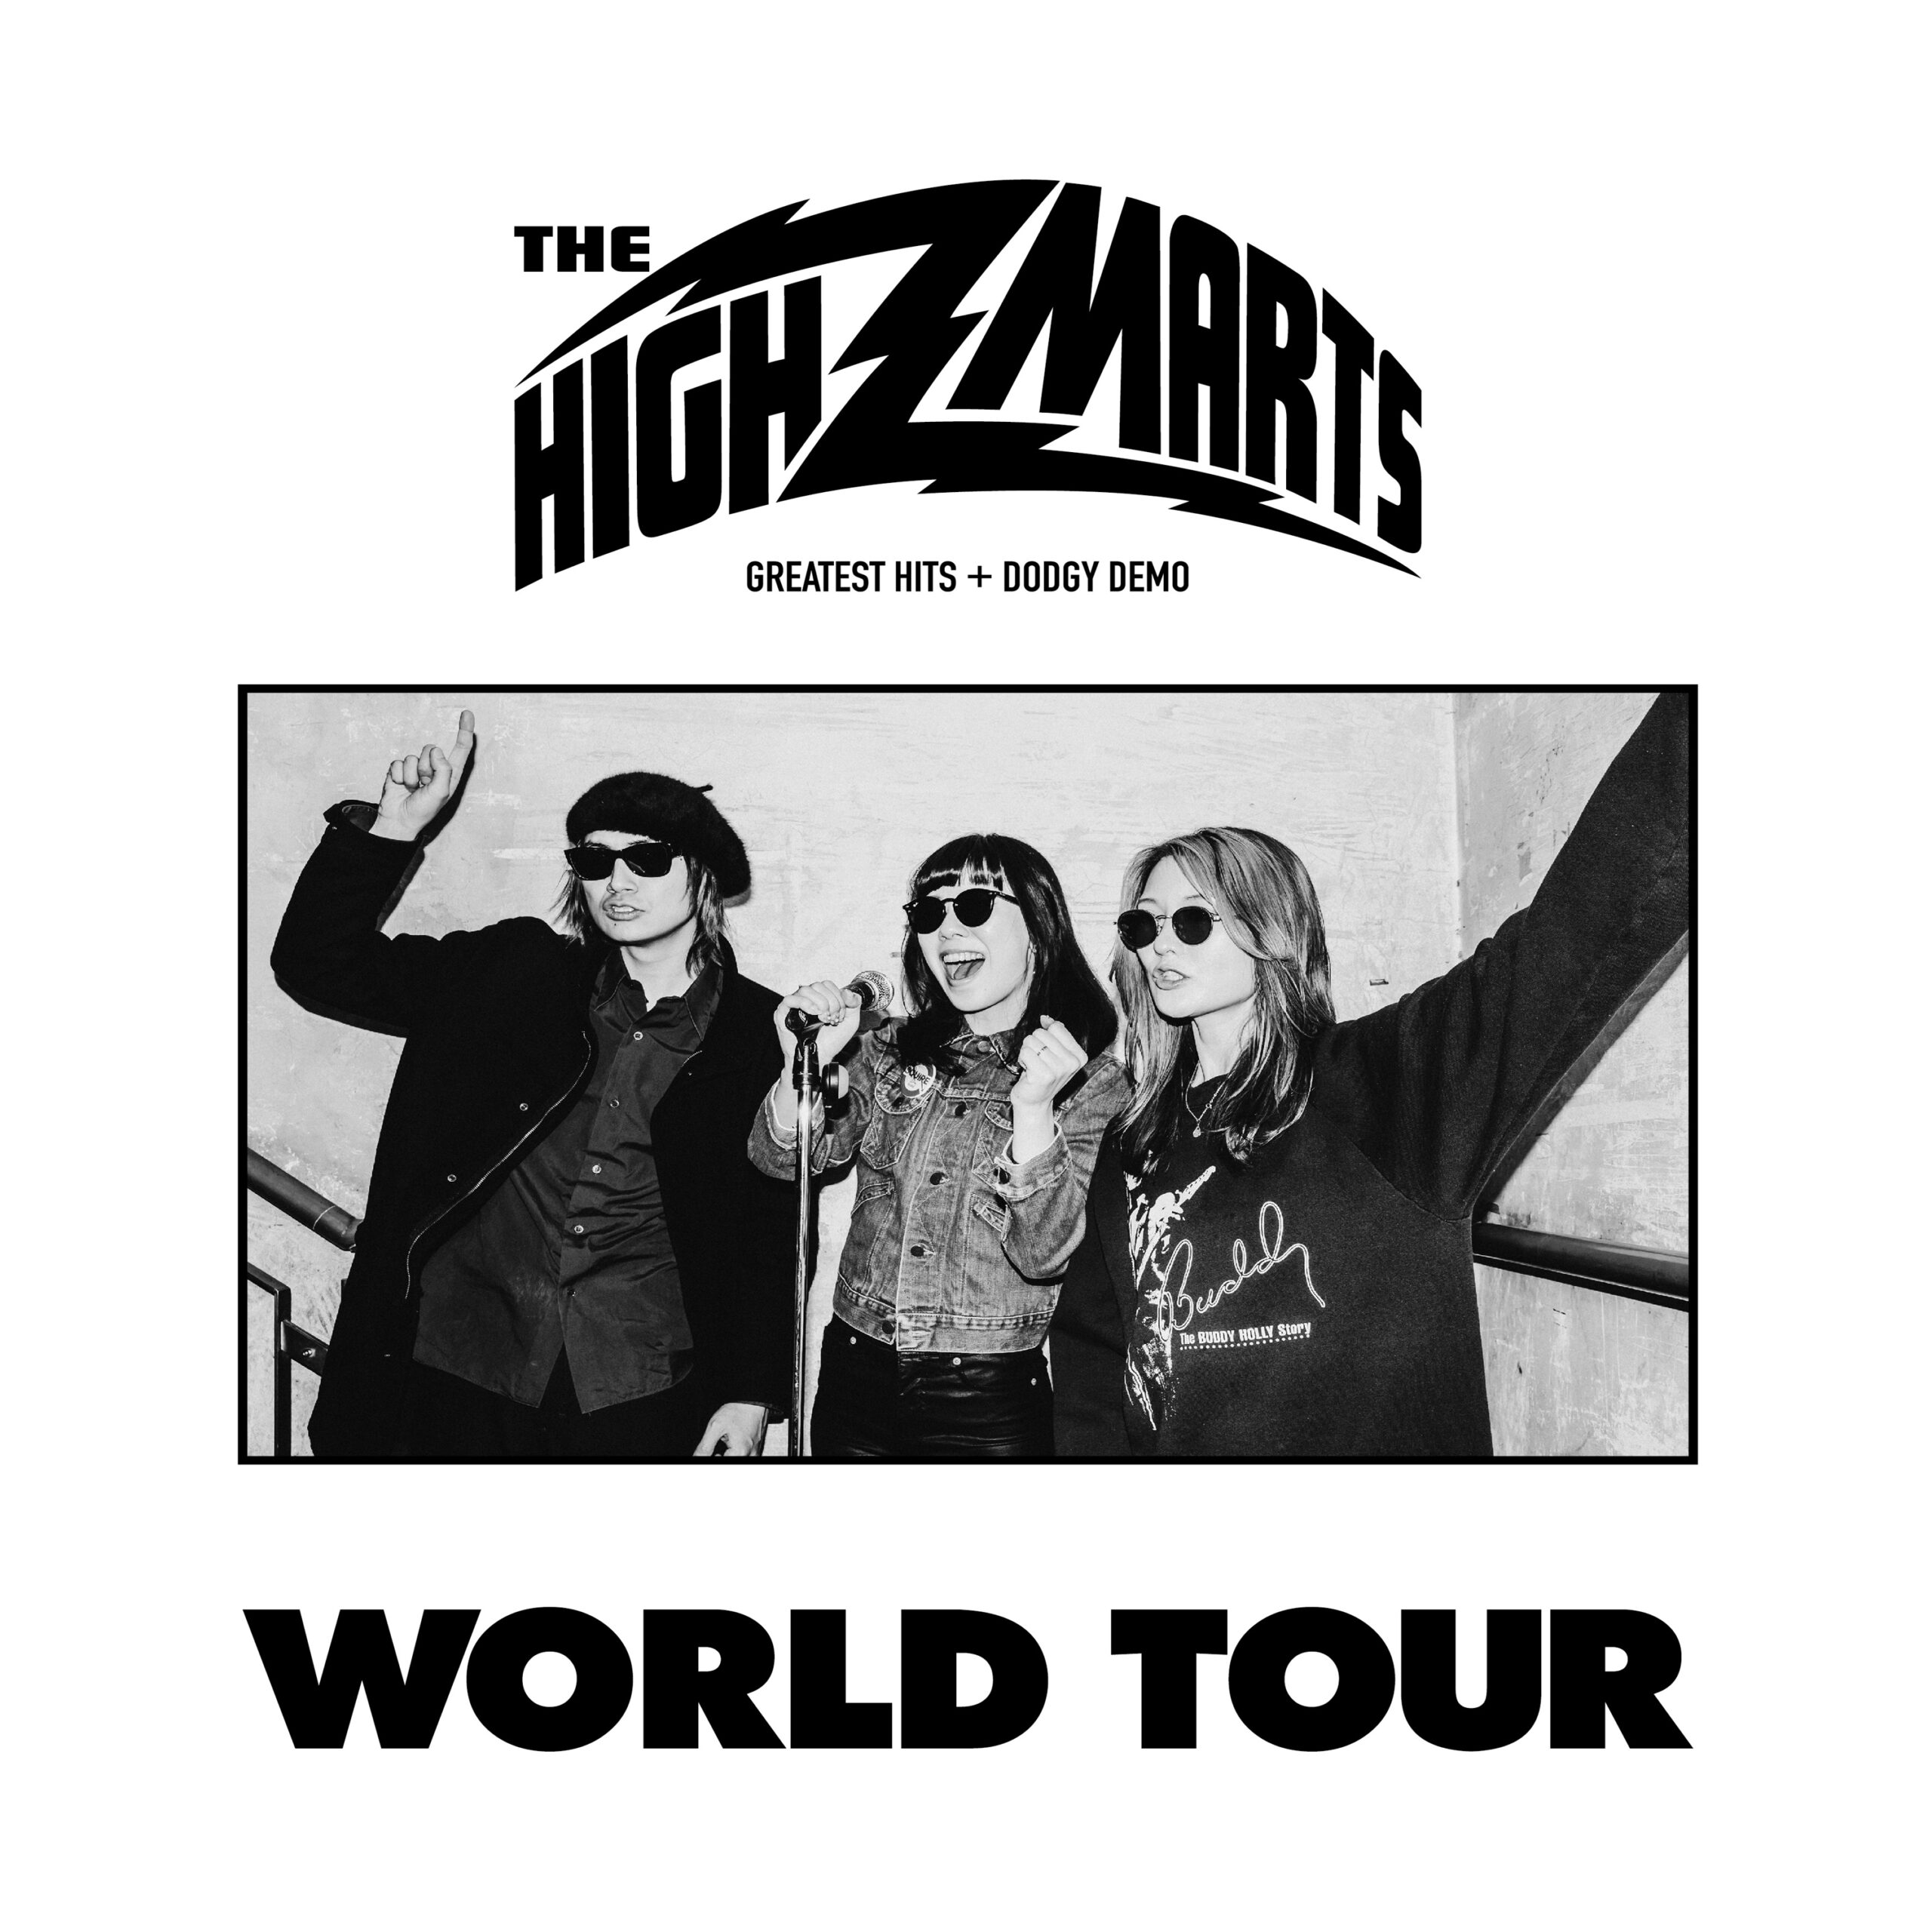 The Highmarts - World Tour & Greatest Hits + Dodgy Demo LP